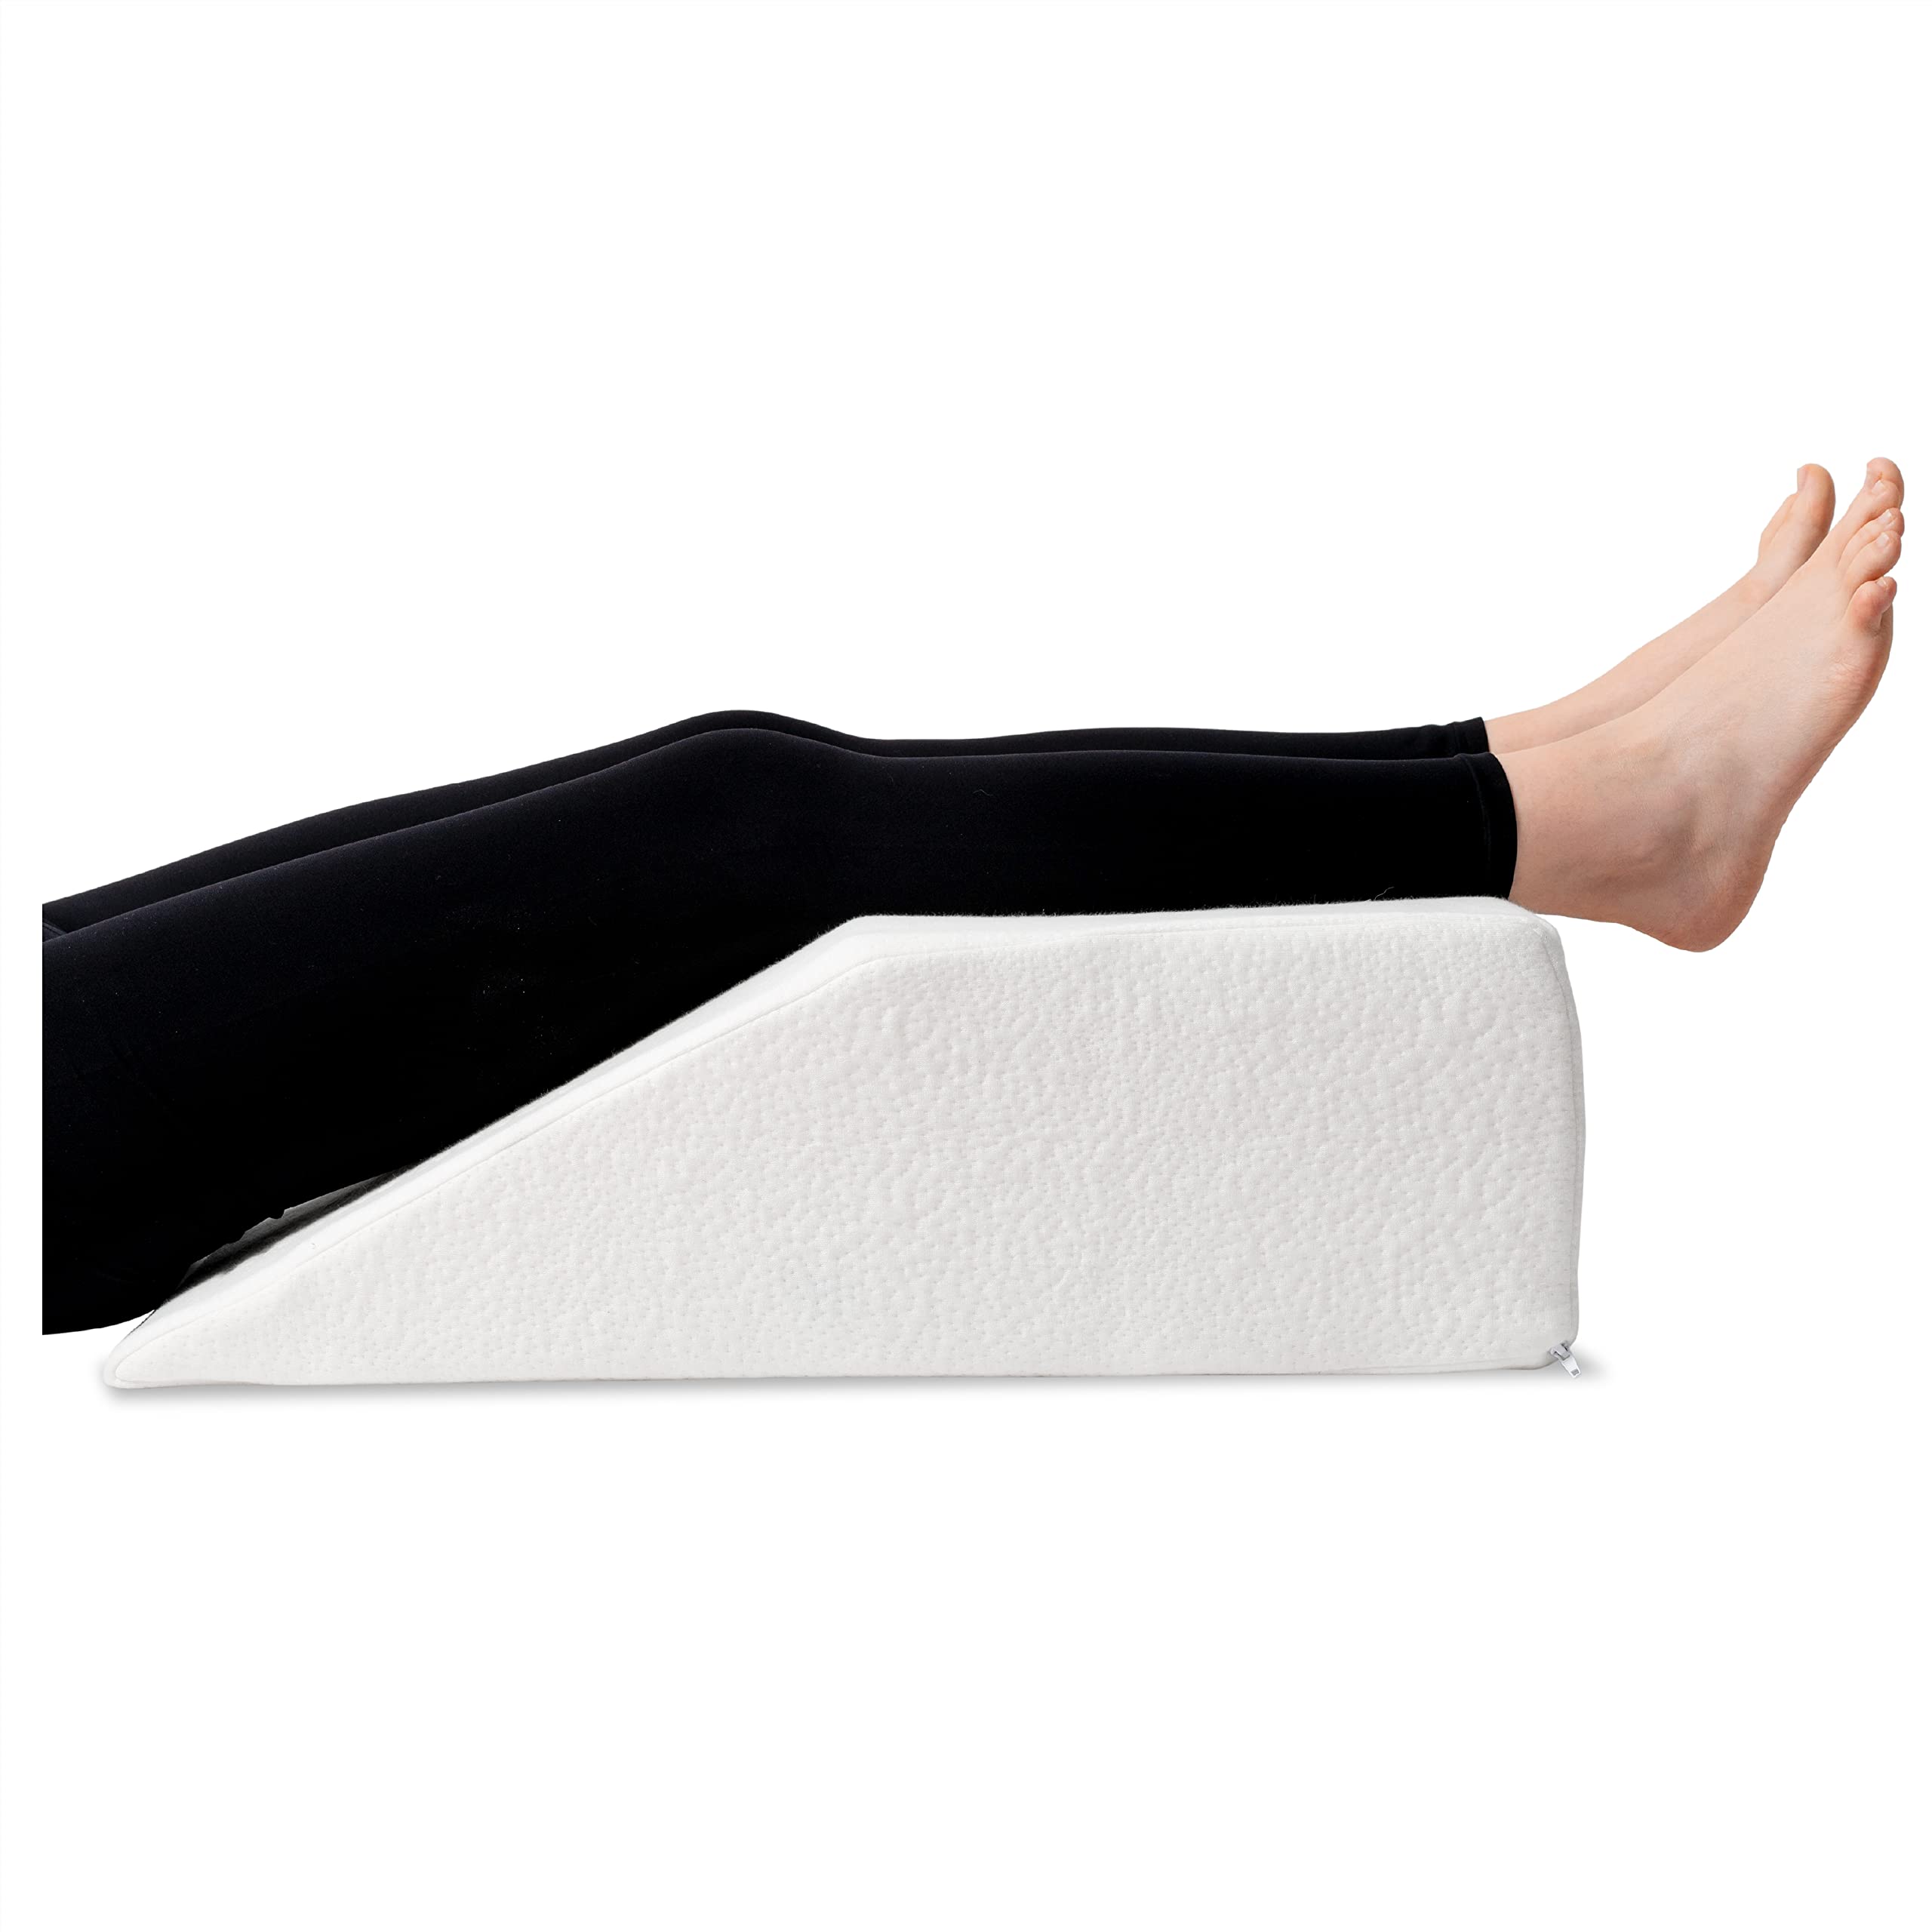 Dreamzie Leg Elevation Pillow - Orthopaedic Leg Support Memory Foam Pillow - For Back Pain, Knee Pain, Pain Post- Surgery, Heavy Legs, Circulation Issues - Breathable, Washable and Hypoallergenic